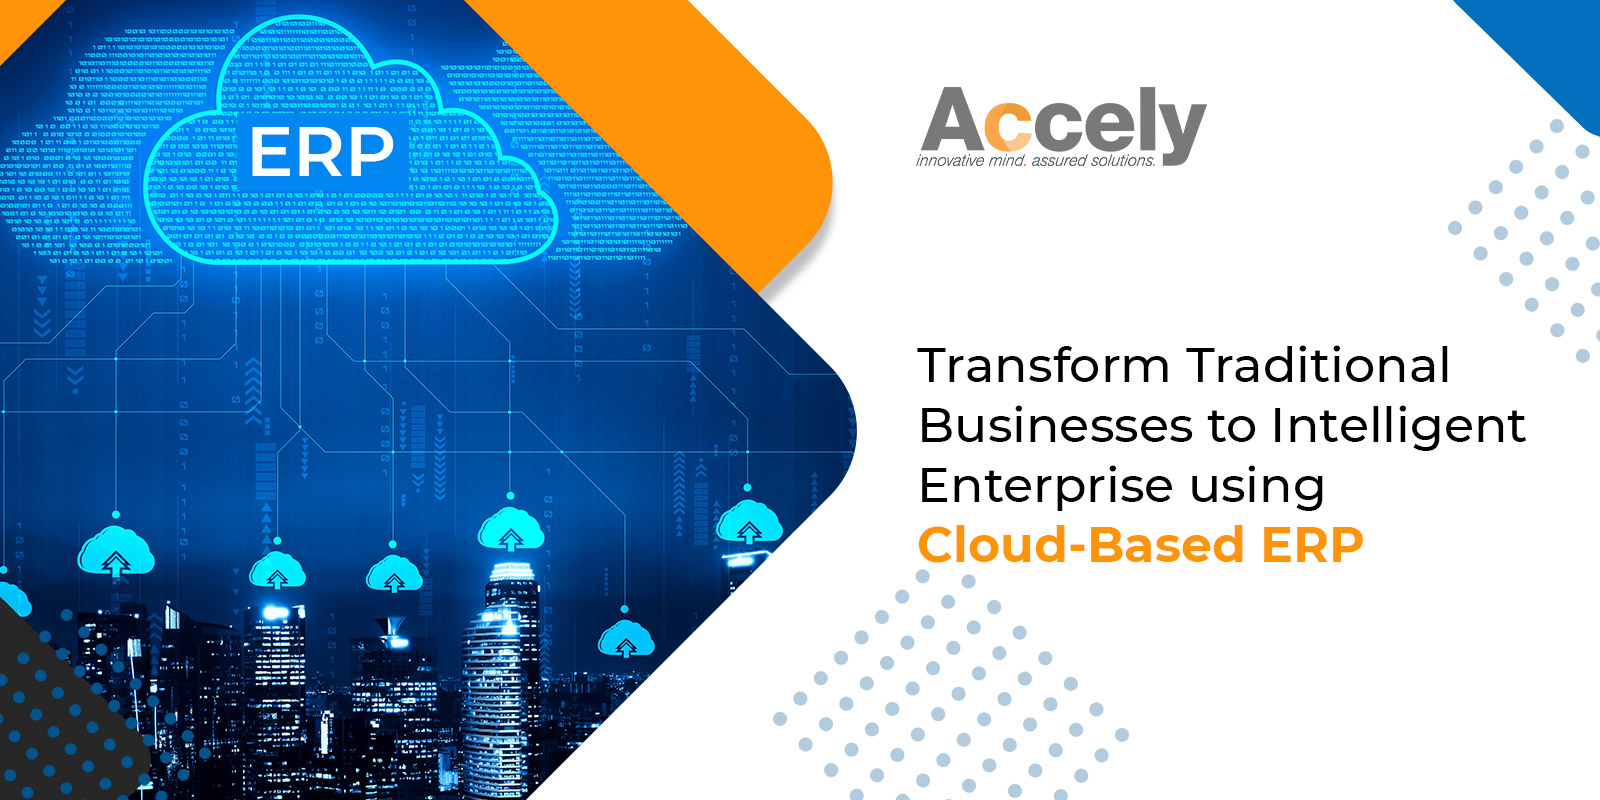 Transform Traditional Businesses to Intelligent Enterprise using Cloud-Based ERP